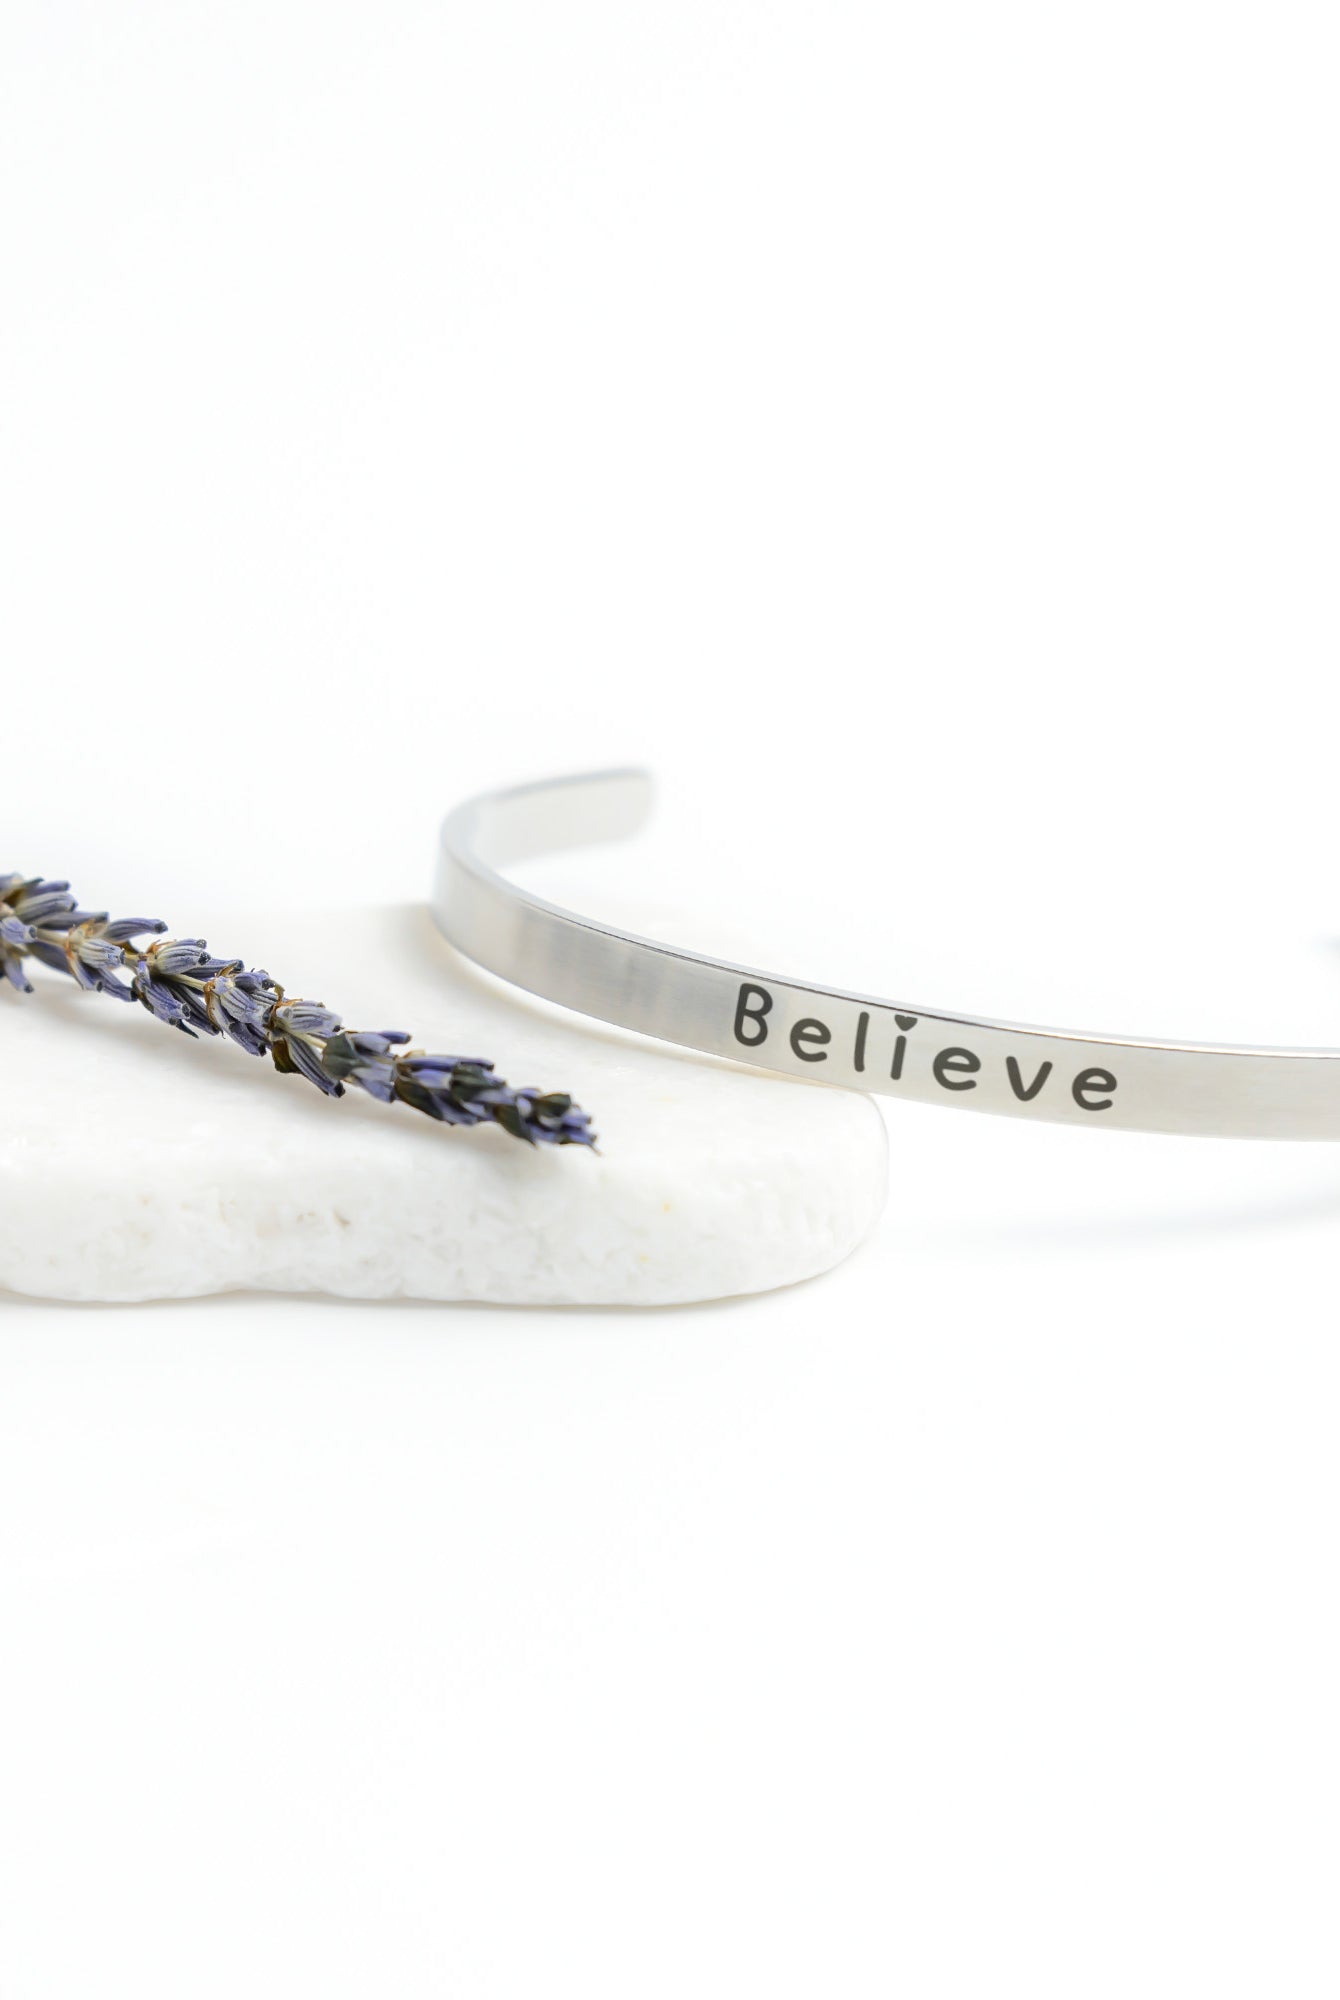 Silver Cuff Bracelet with the word "Believe" written on the outside.  The inside reads, "Believe in the beauty of your journey."